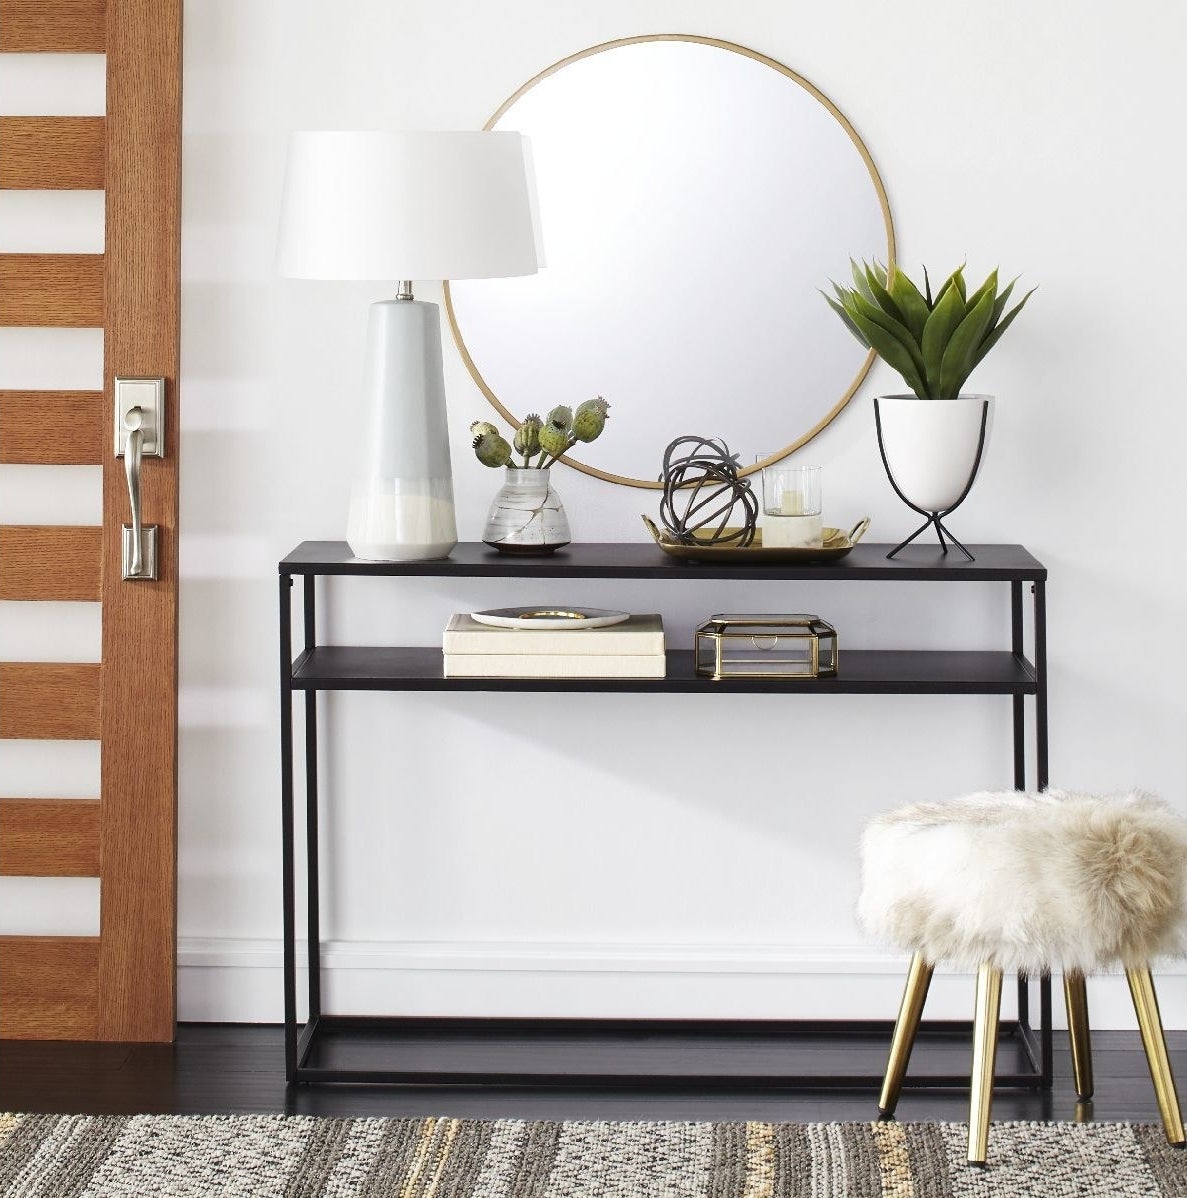 31 Target Home Items Under $100 That Reviewers Love